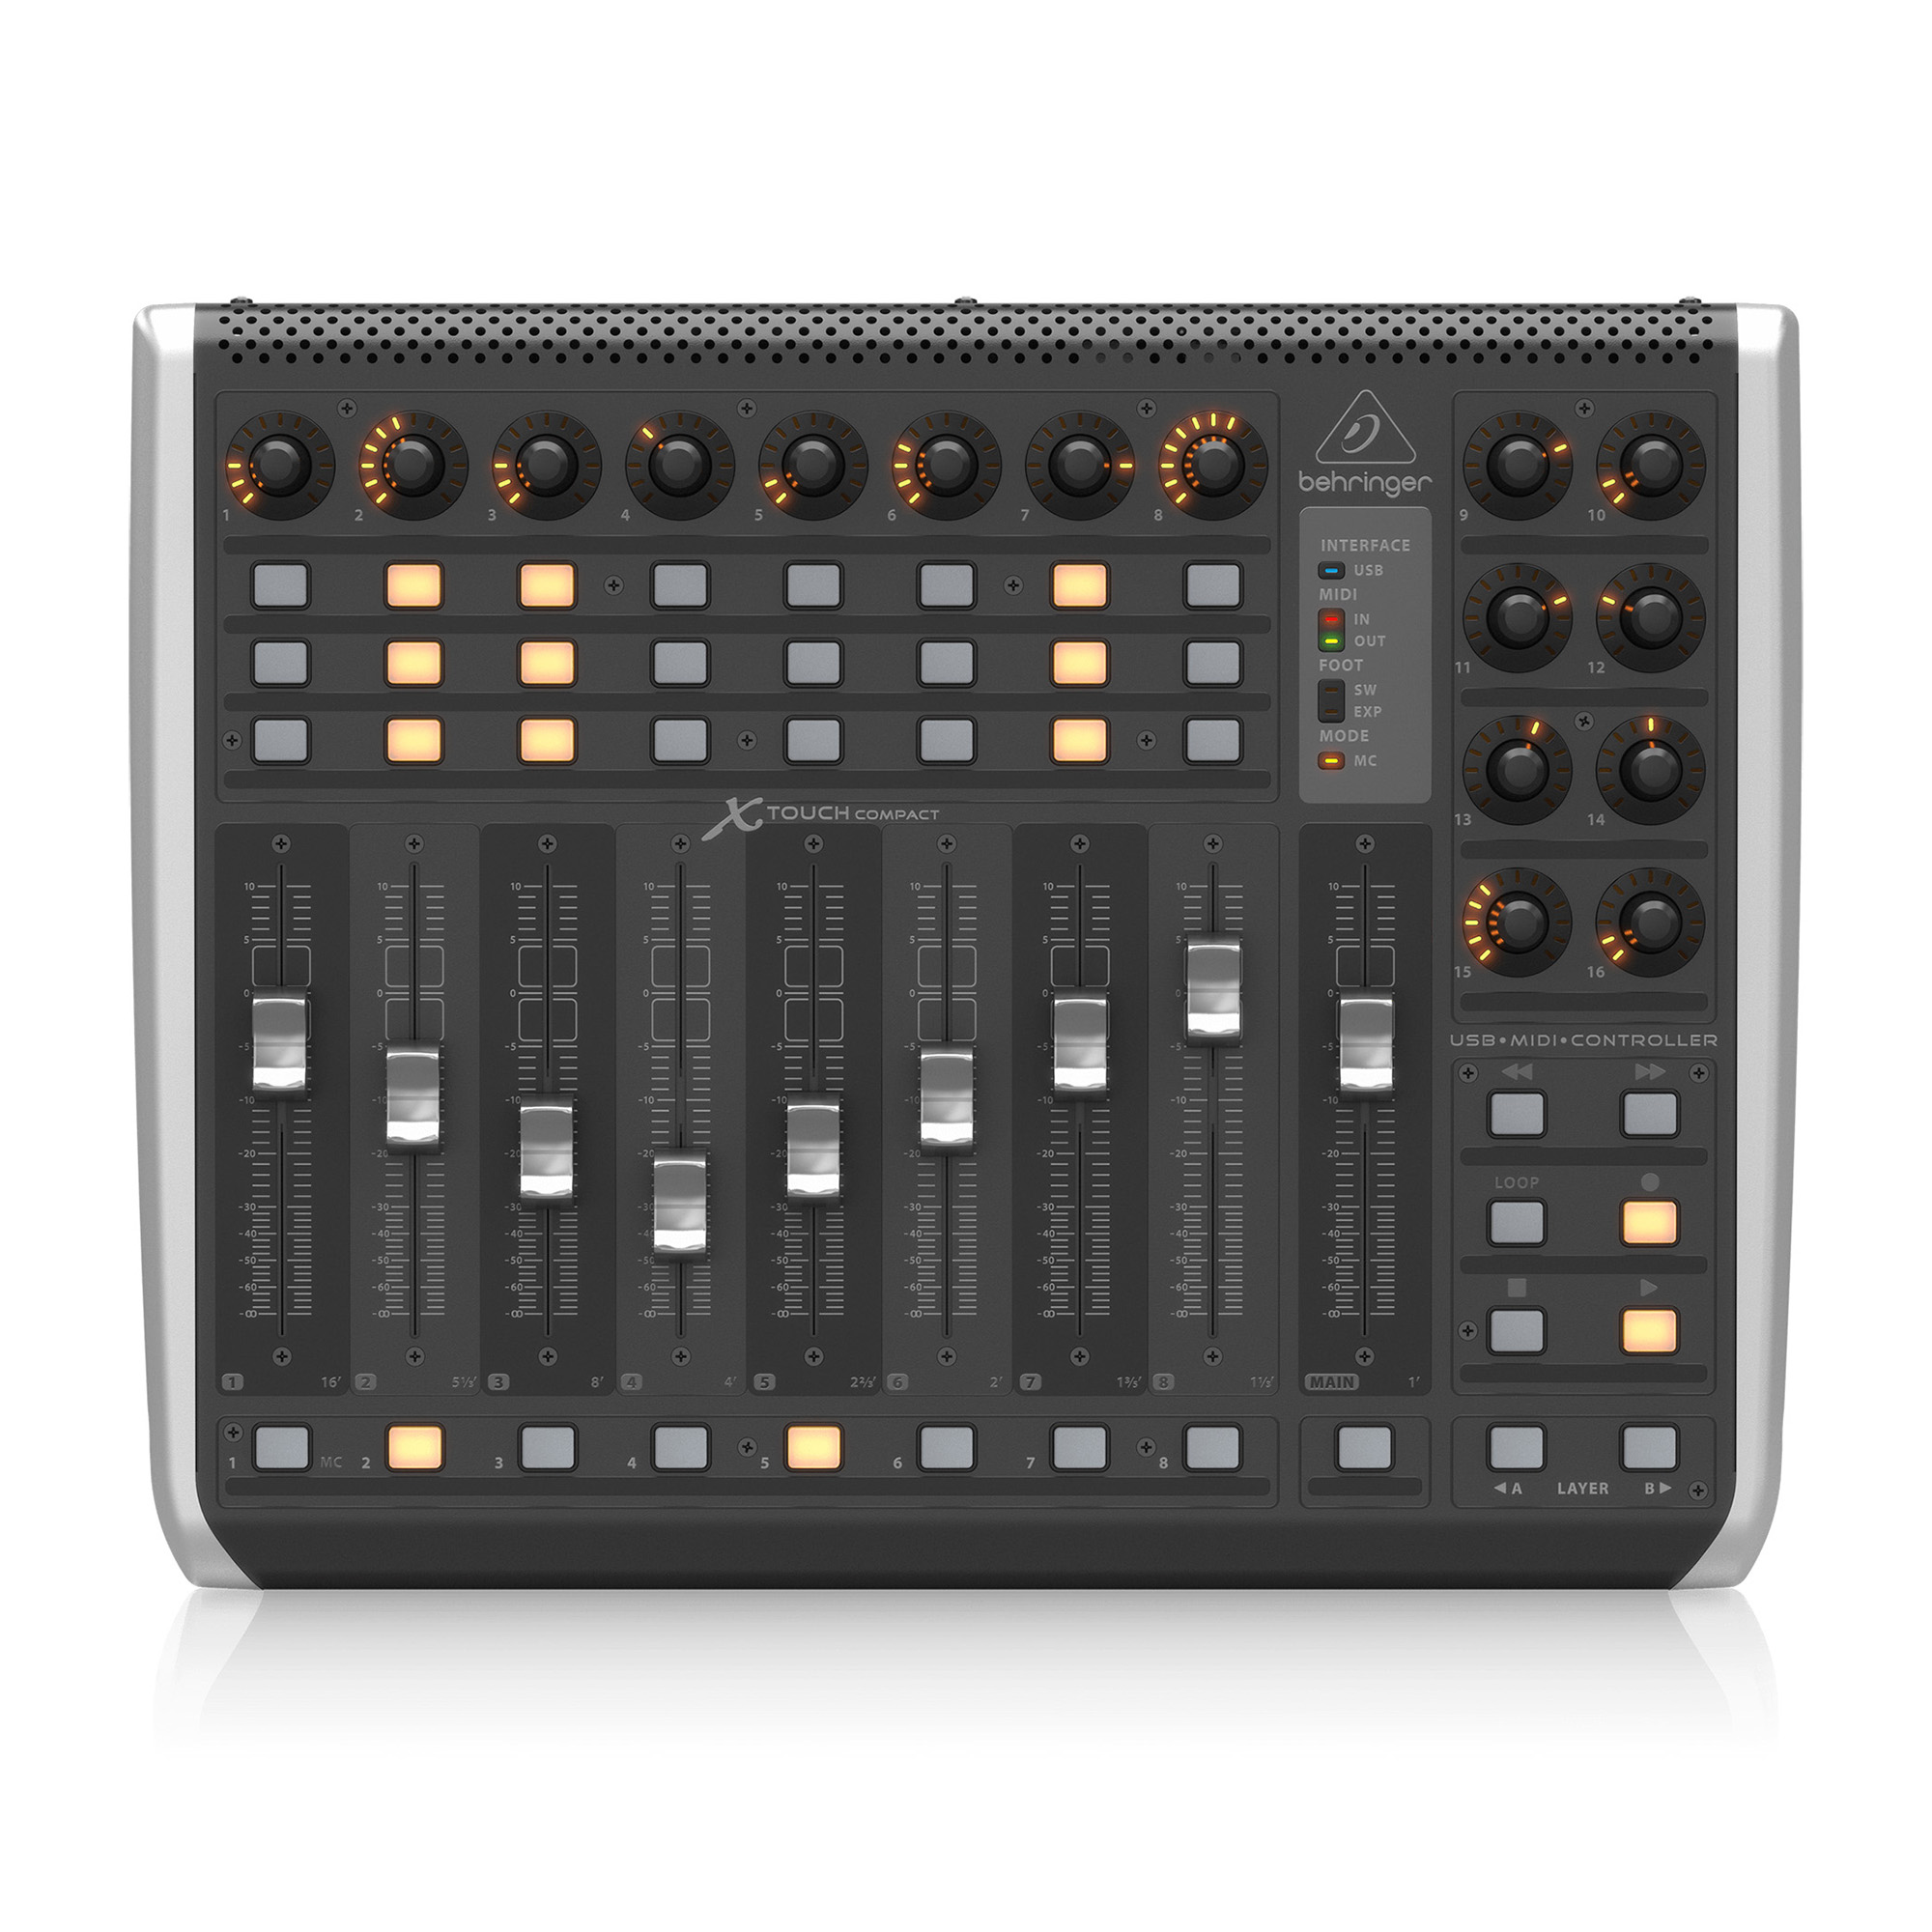 BEHRINGER [X-TOUCH COMPACT] デスクトップ･コントローラー